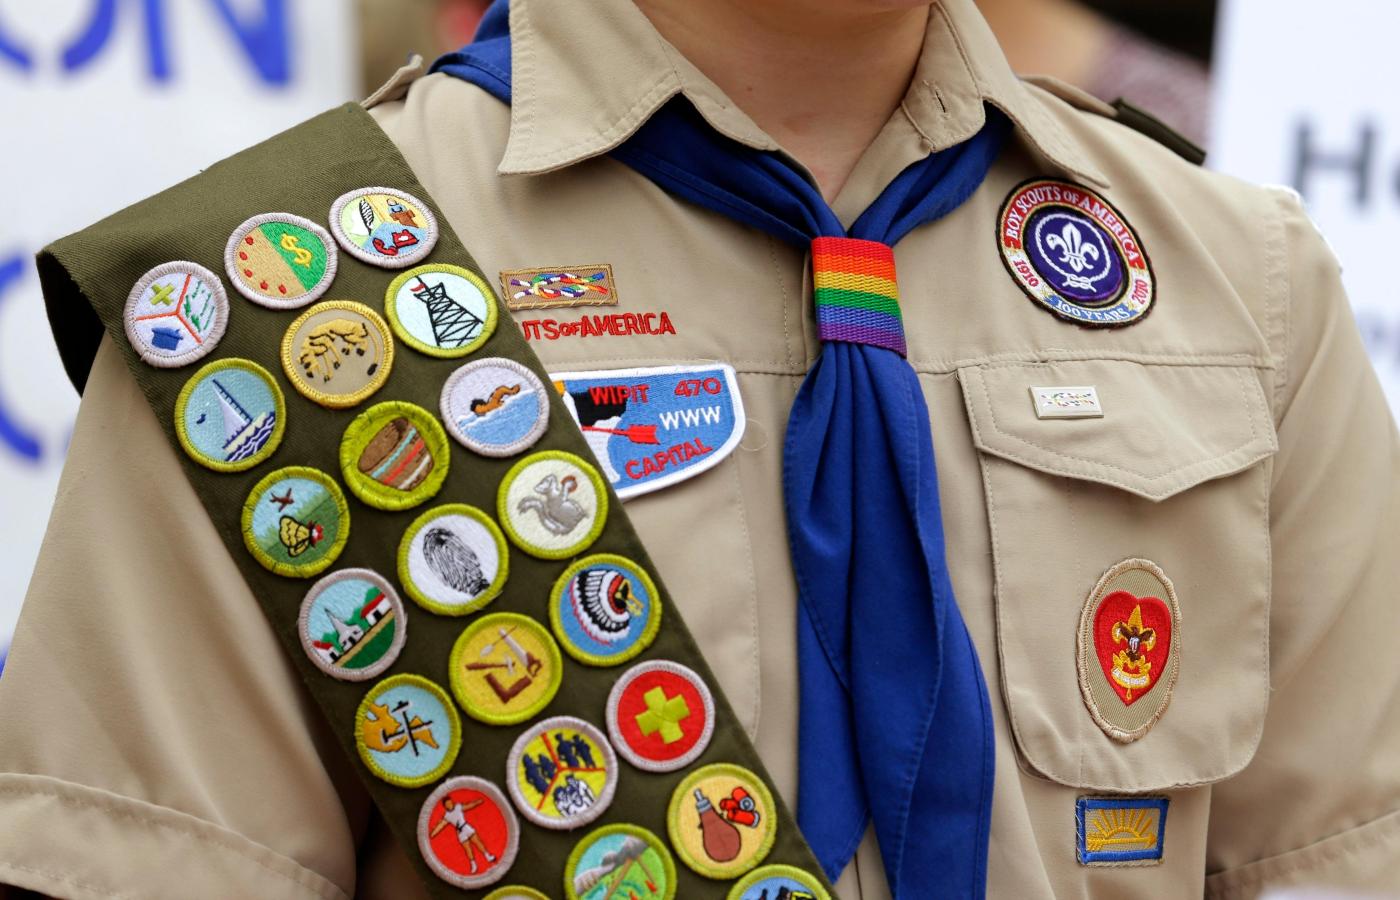 boy-scouts-of-america-changing-name-to-more-inclusive-scouting-america-after-years-of-woes